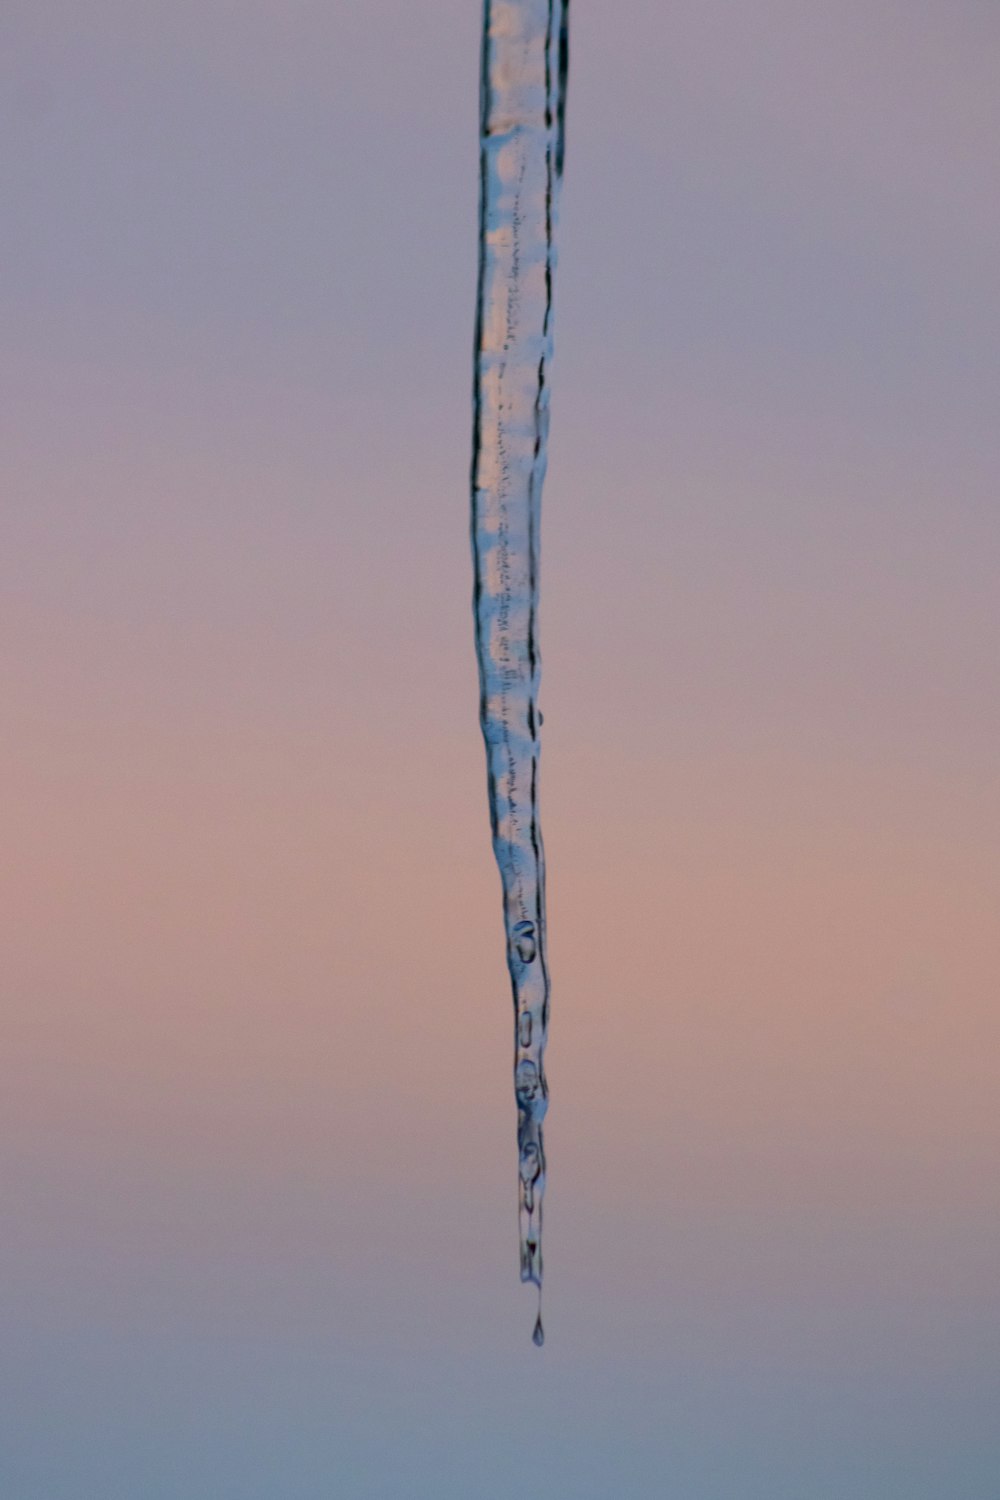 a long icicle hanging from the side of a building